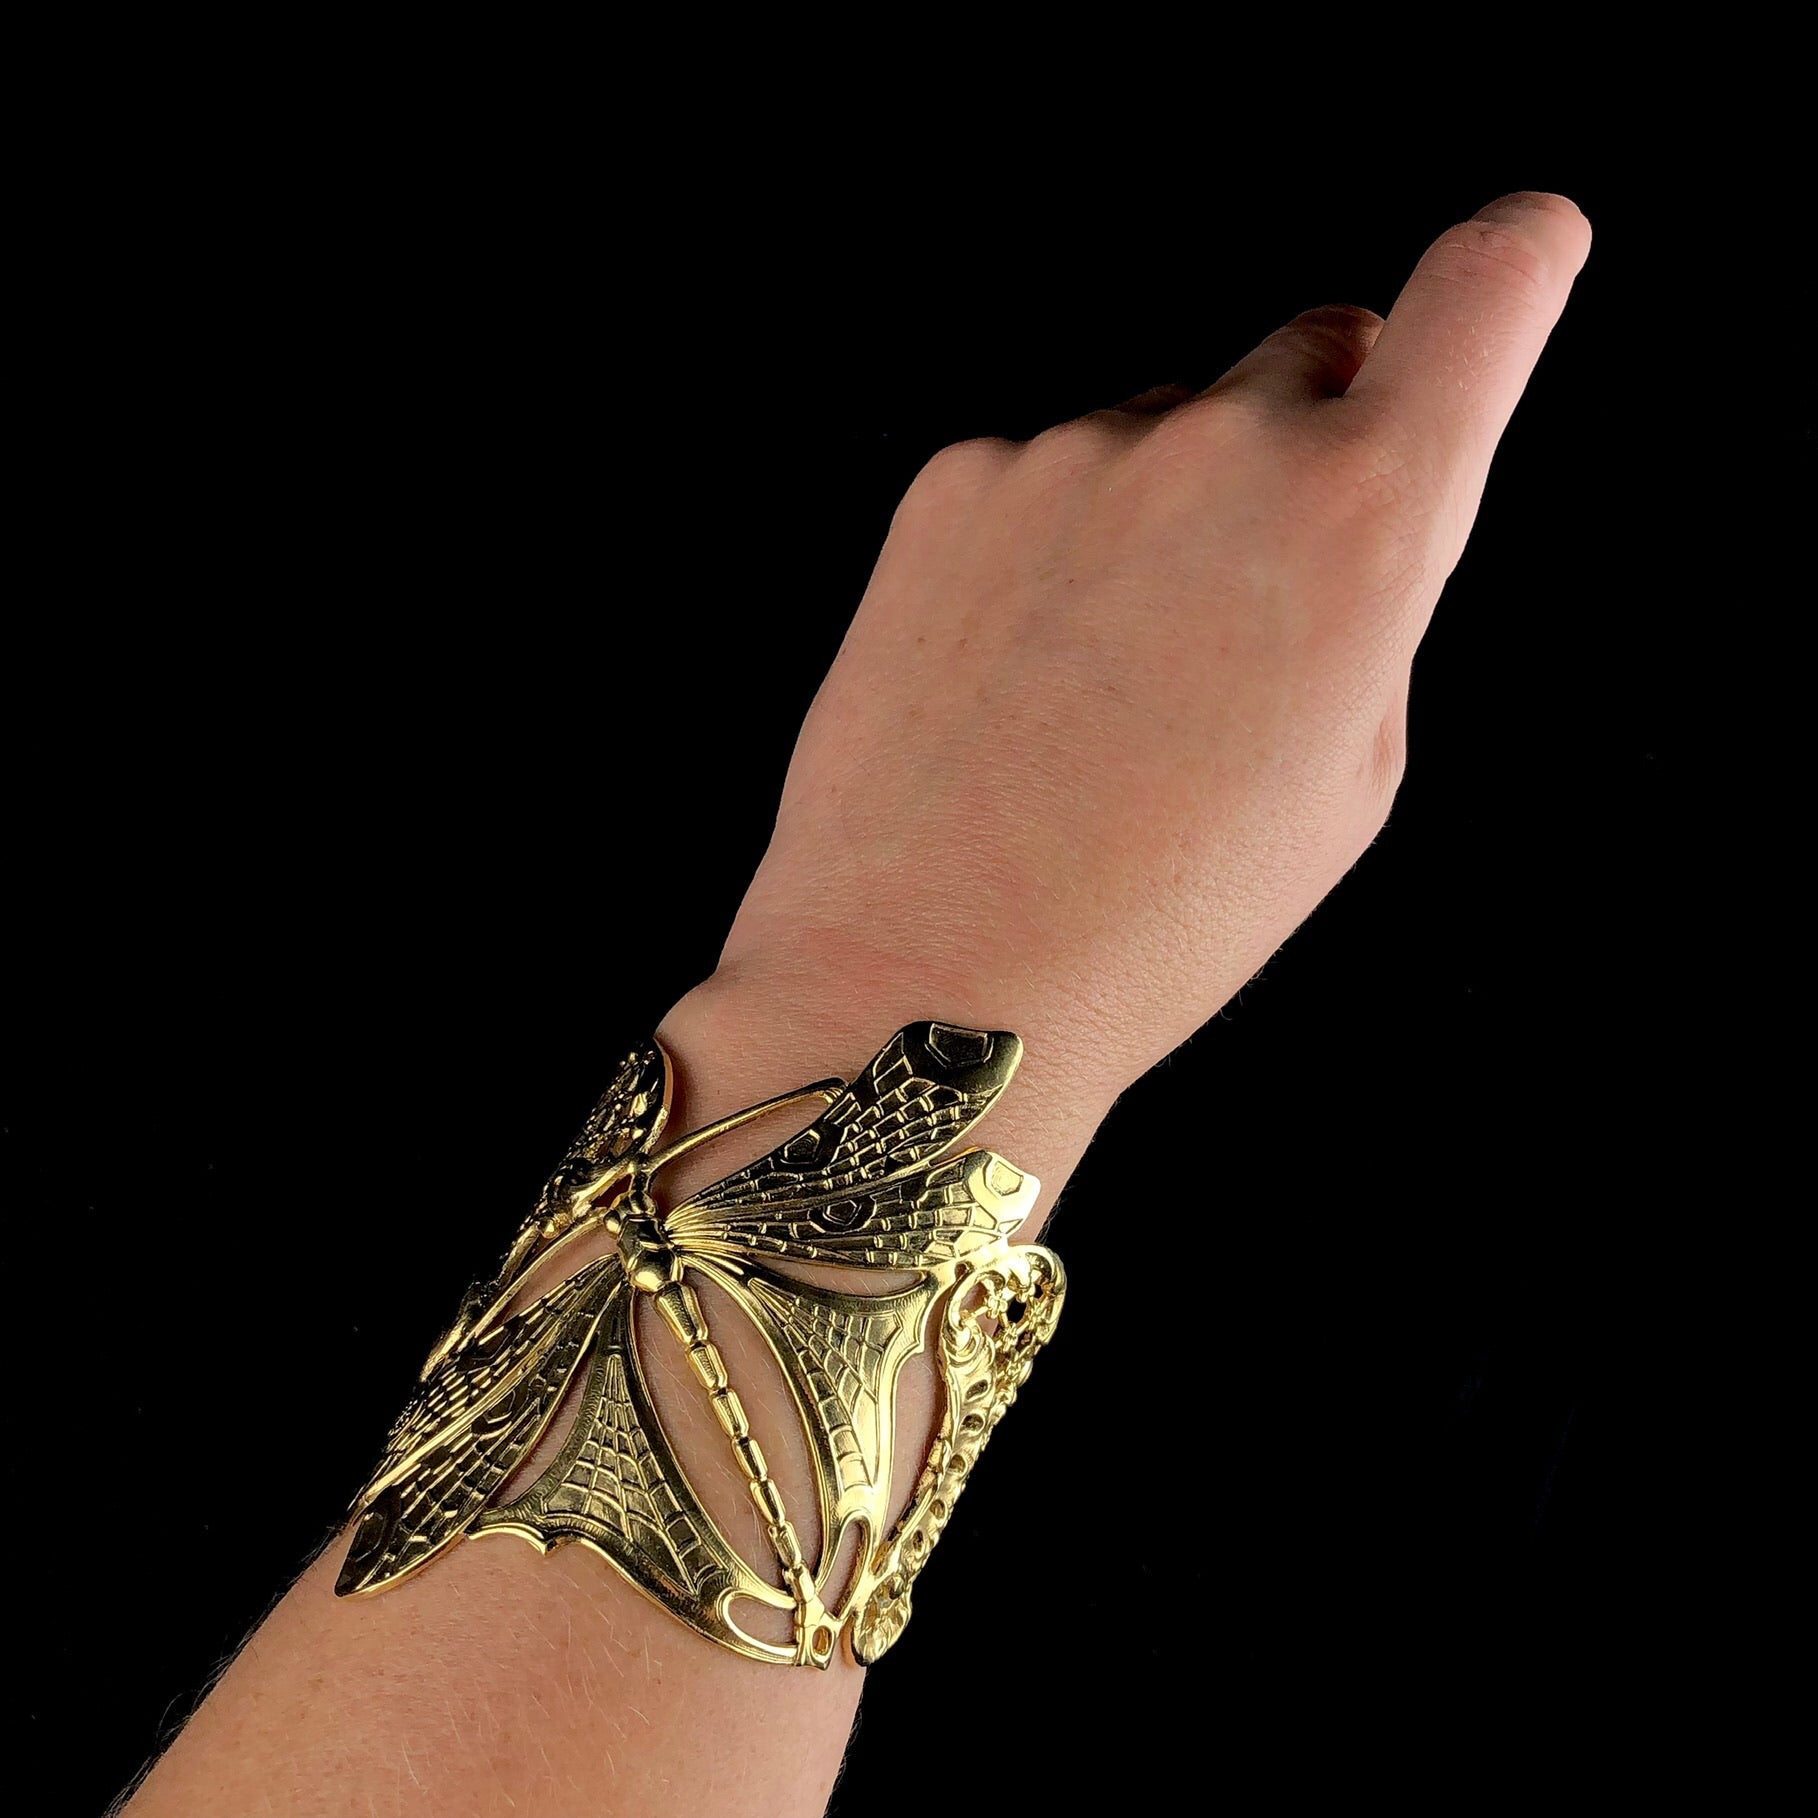 Gold Lace Dragonfly Cuff shown on wrist